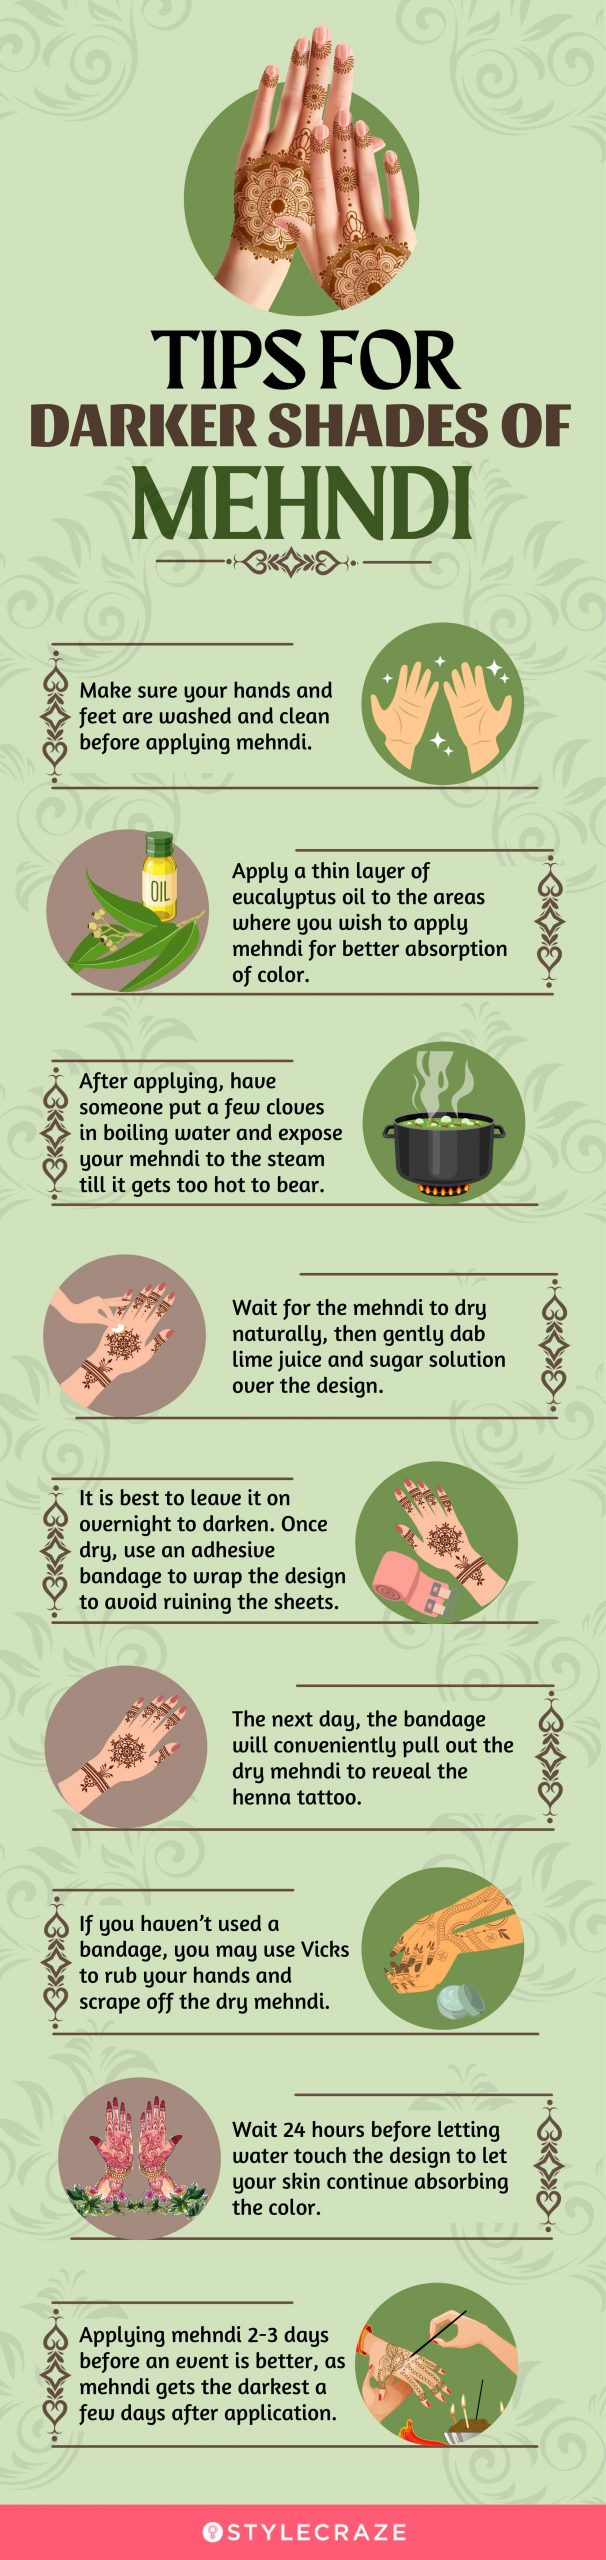 tips for darker shades of mehandi [infographic]